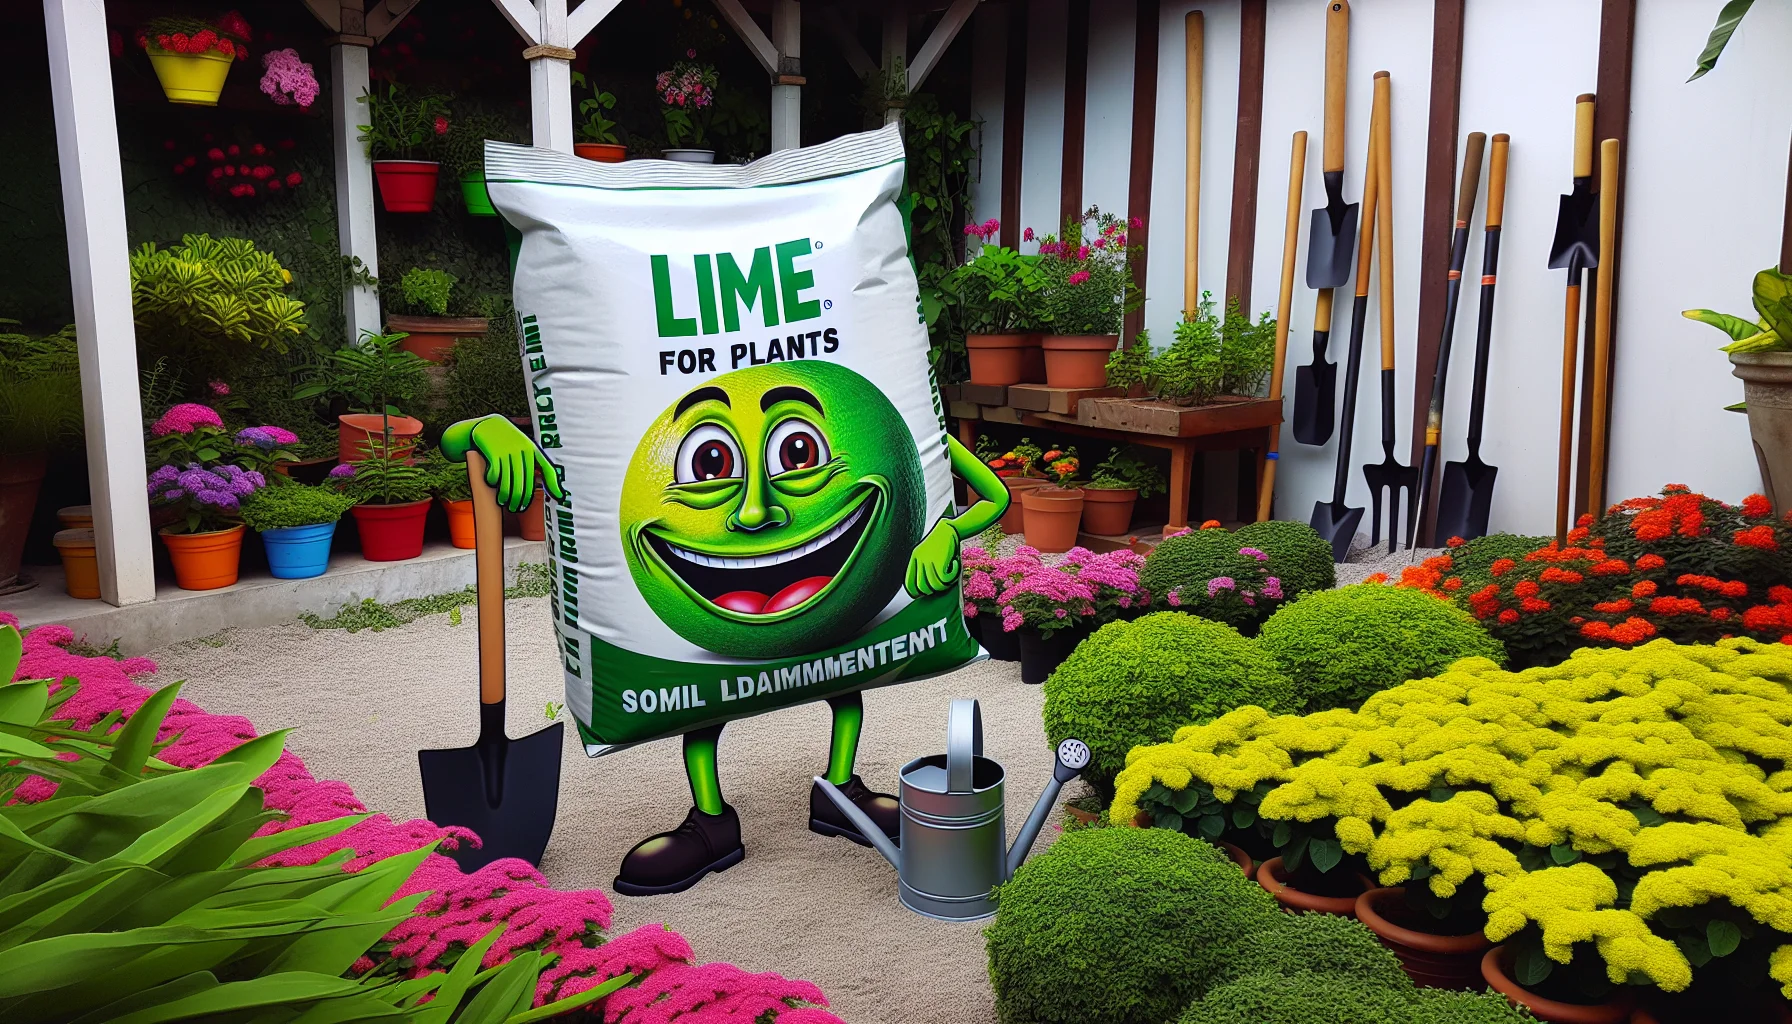 Generate an image through realism that depicts a comical scene set in a vibrant garden. In the garden, a bag of lime for plants (common soil amendment) is illustrated with an amusing cartoon-like face on it. The soil amendment is presenting itself in a cheerful and inviting manner, thereby encouraging people that even tasks such as soil amendment can be full of joy and humor. Besides, let's see garden tools like a spade and watering can, and multicolored plants around it. This image should exude the charm and delight of gardening.